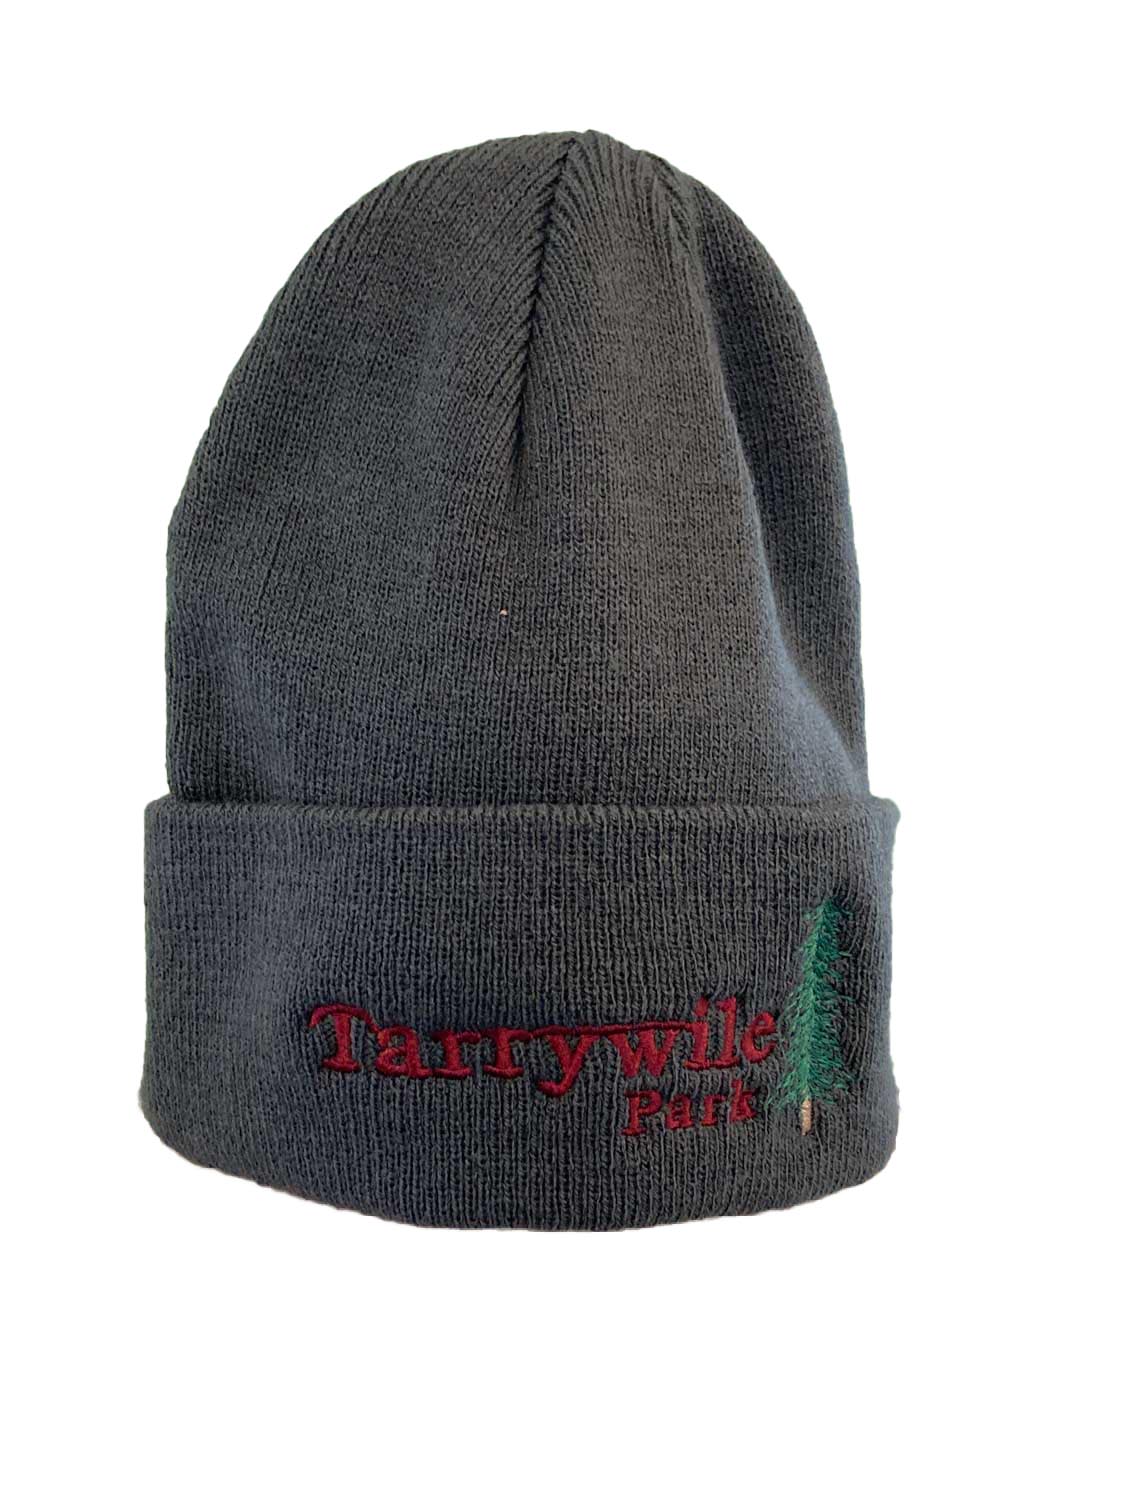 knitted tarrywile gray watch cap